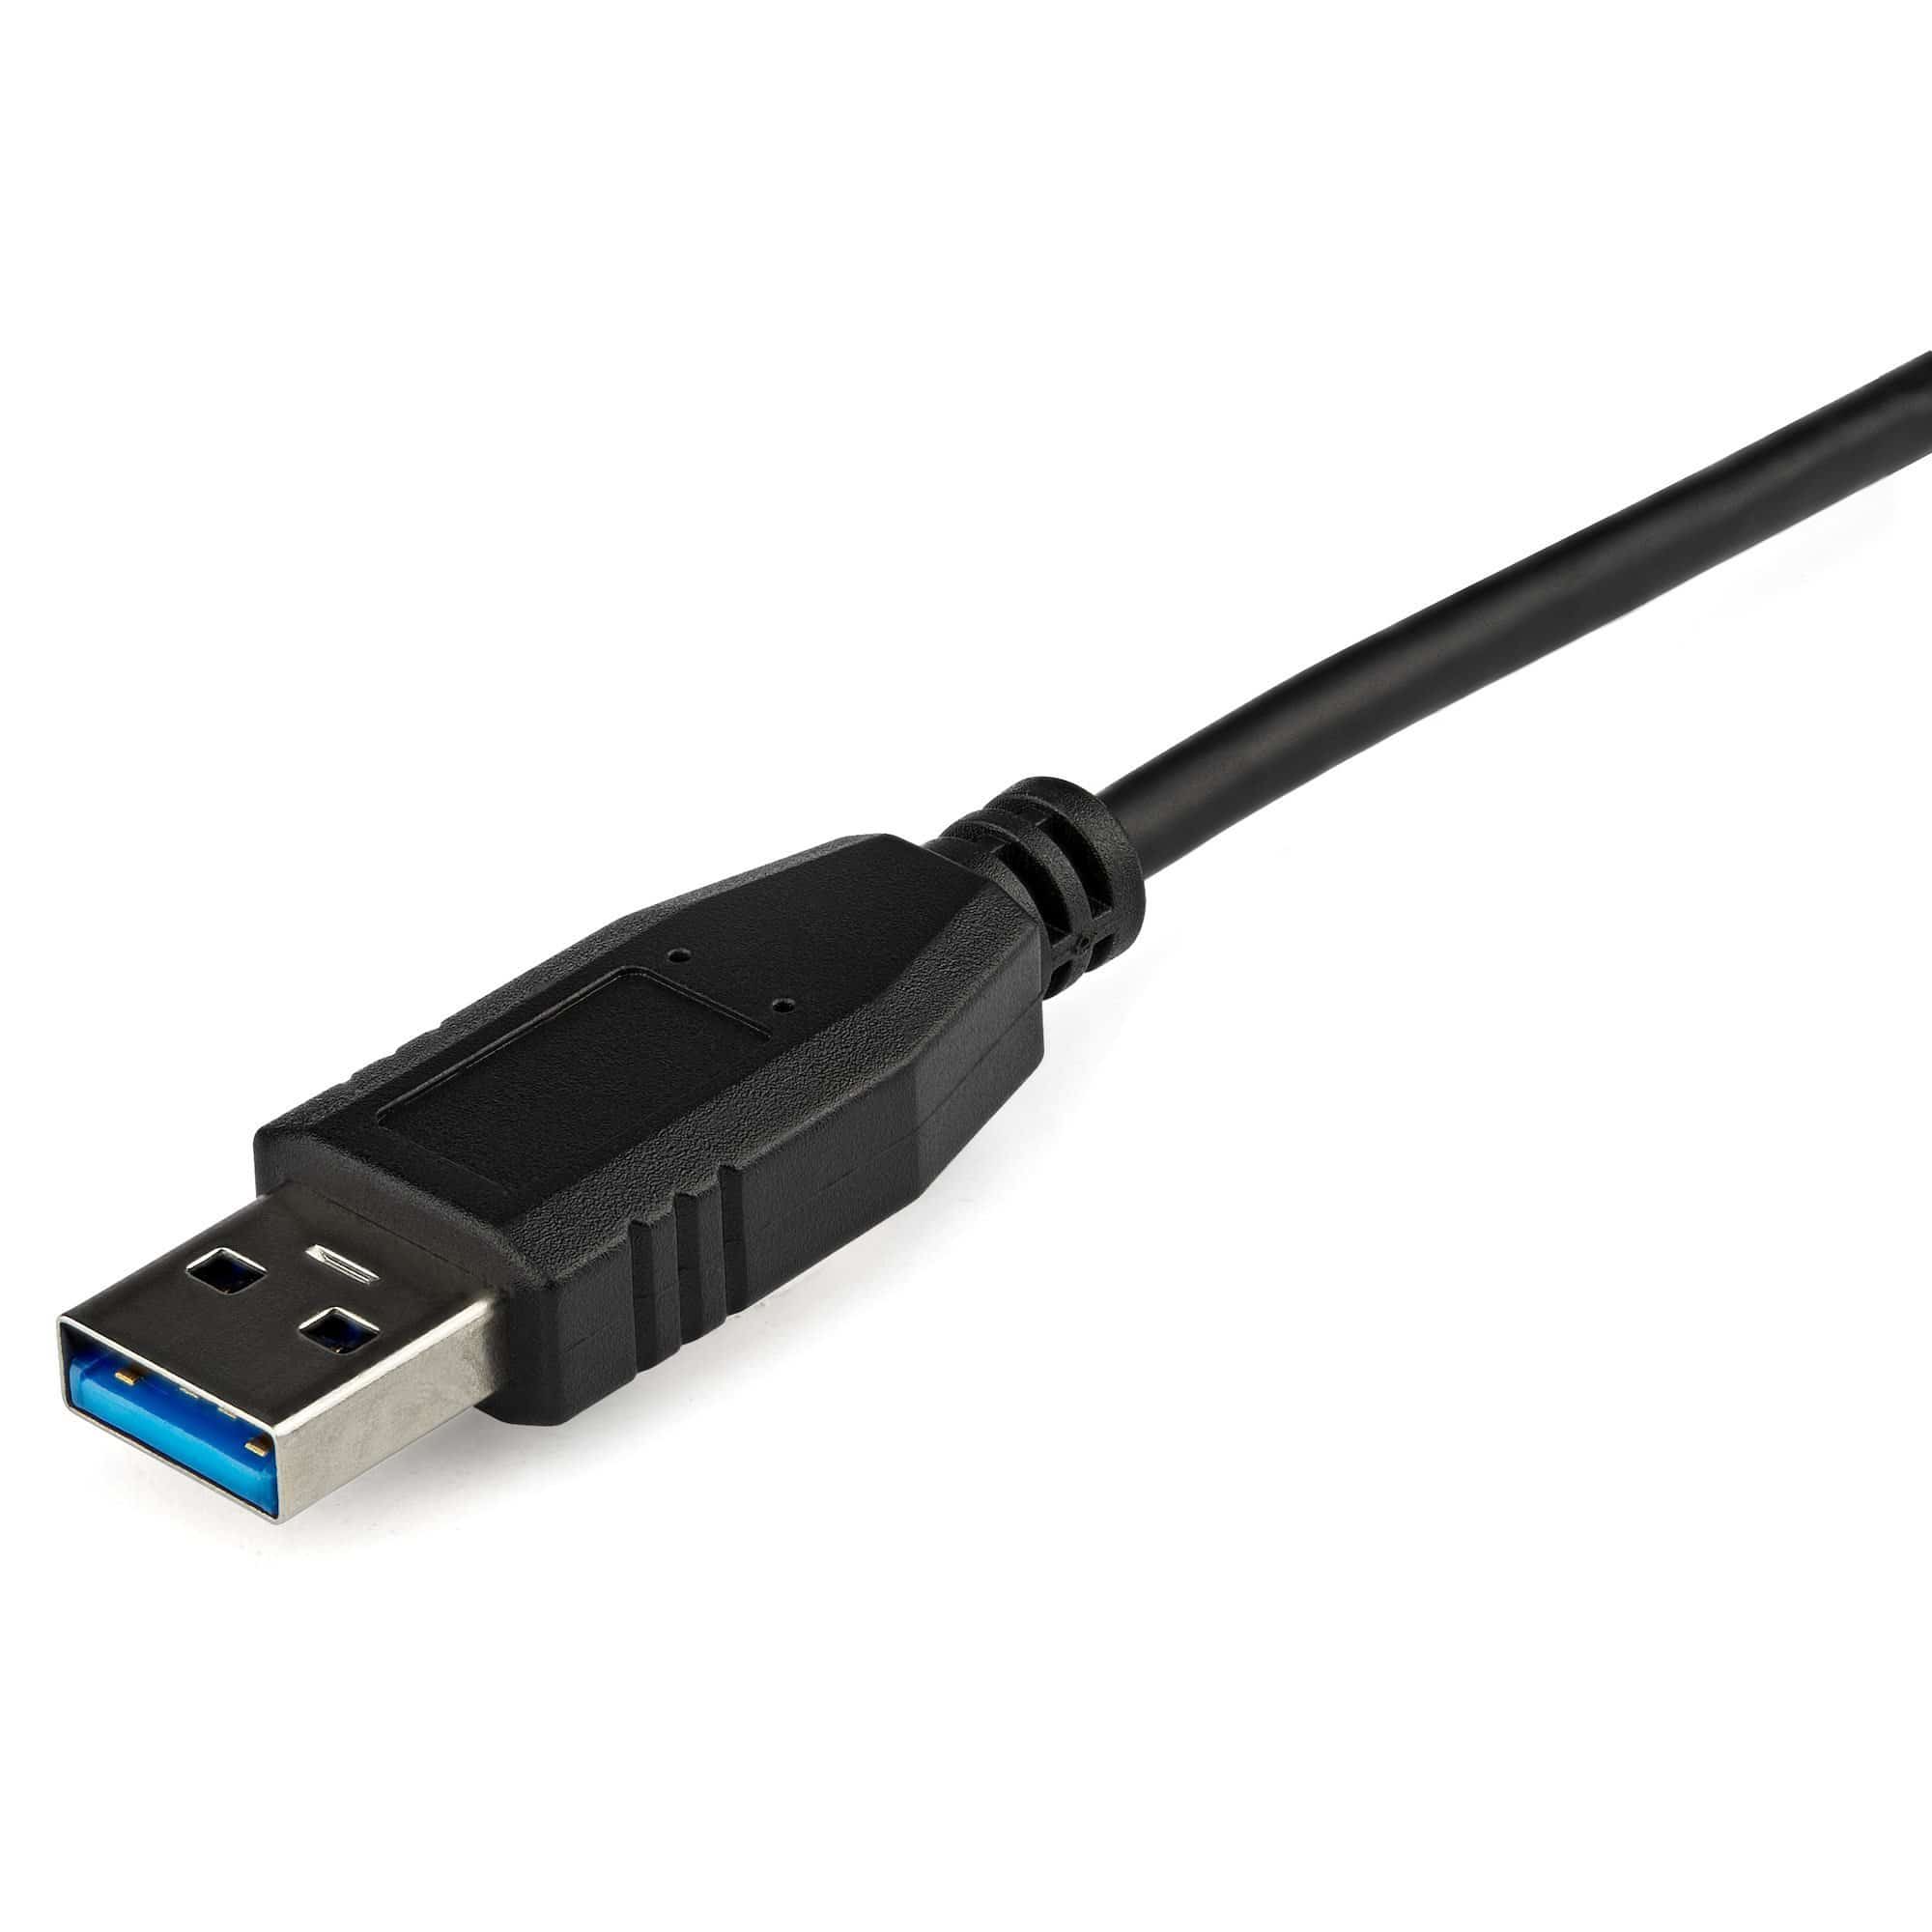 Startech USB 3.0 to Gigabit Ethernet NIC Network Adapter USB31000S (Black) (2 years Local Warranty), Accessories, StarTech, Buy Singapore